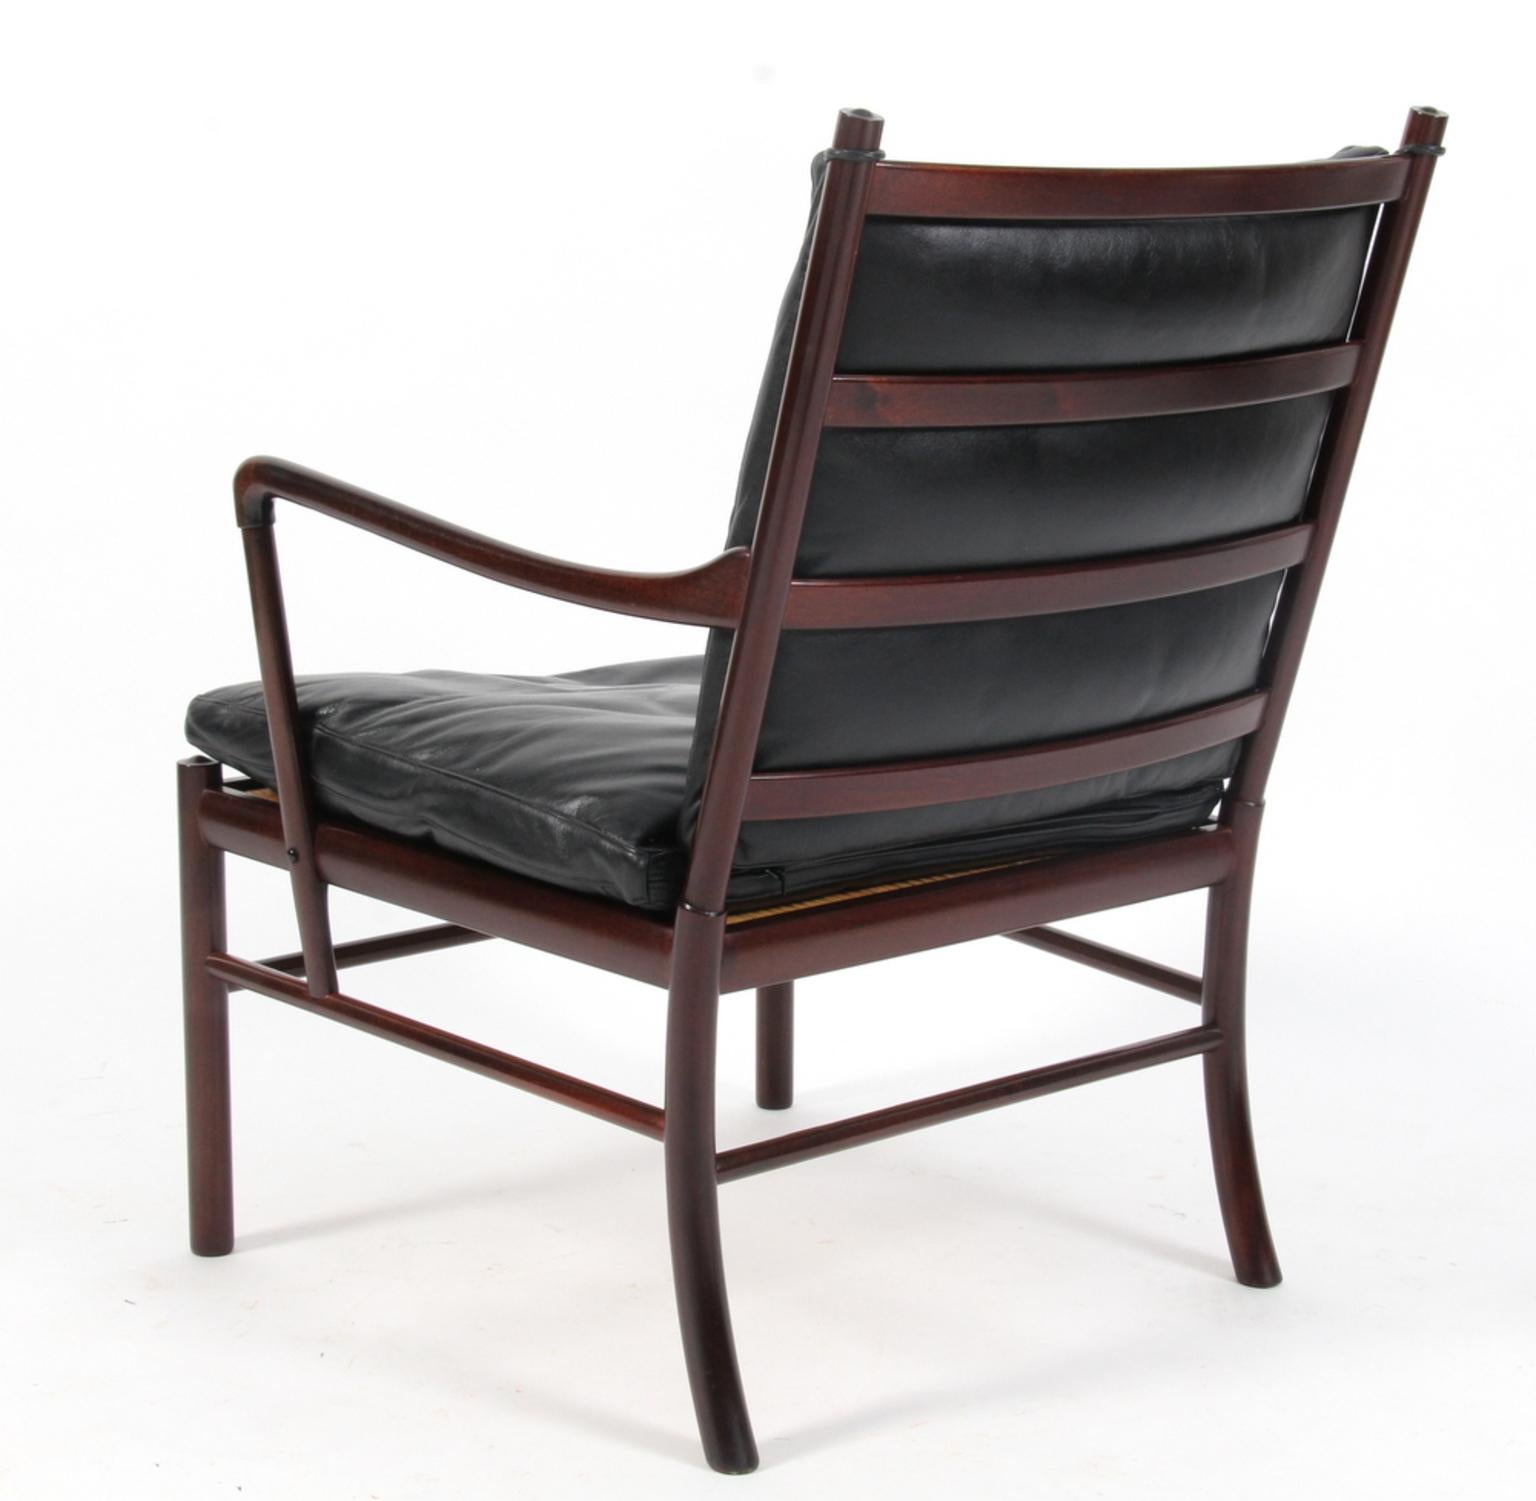 Mid-20th Century Ole Wanscher Colonial Chair and Ottoman in Mahogany and Original Leather, PJ 149